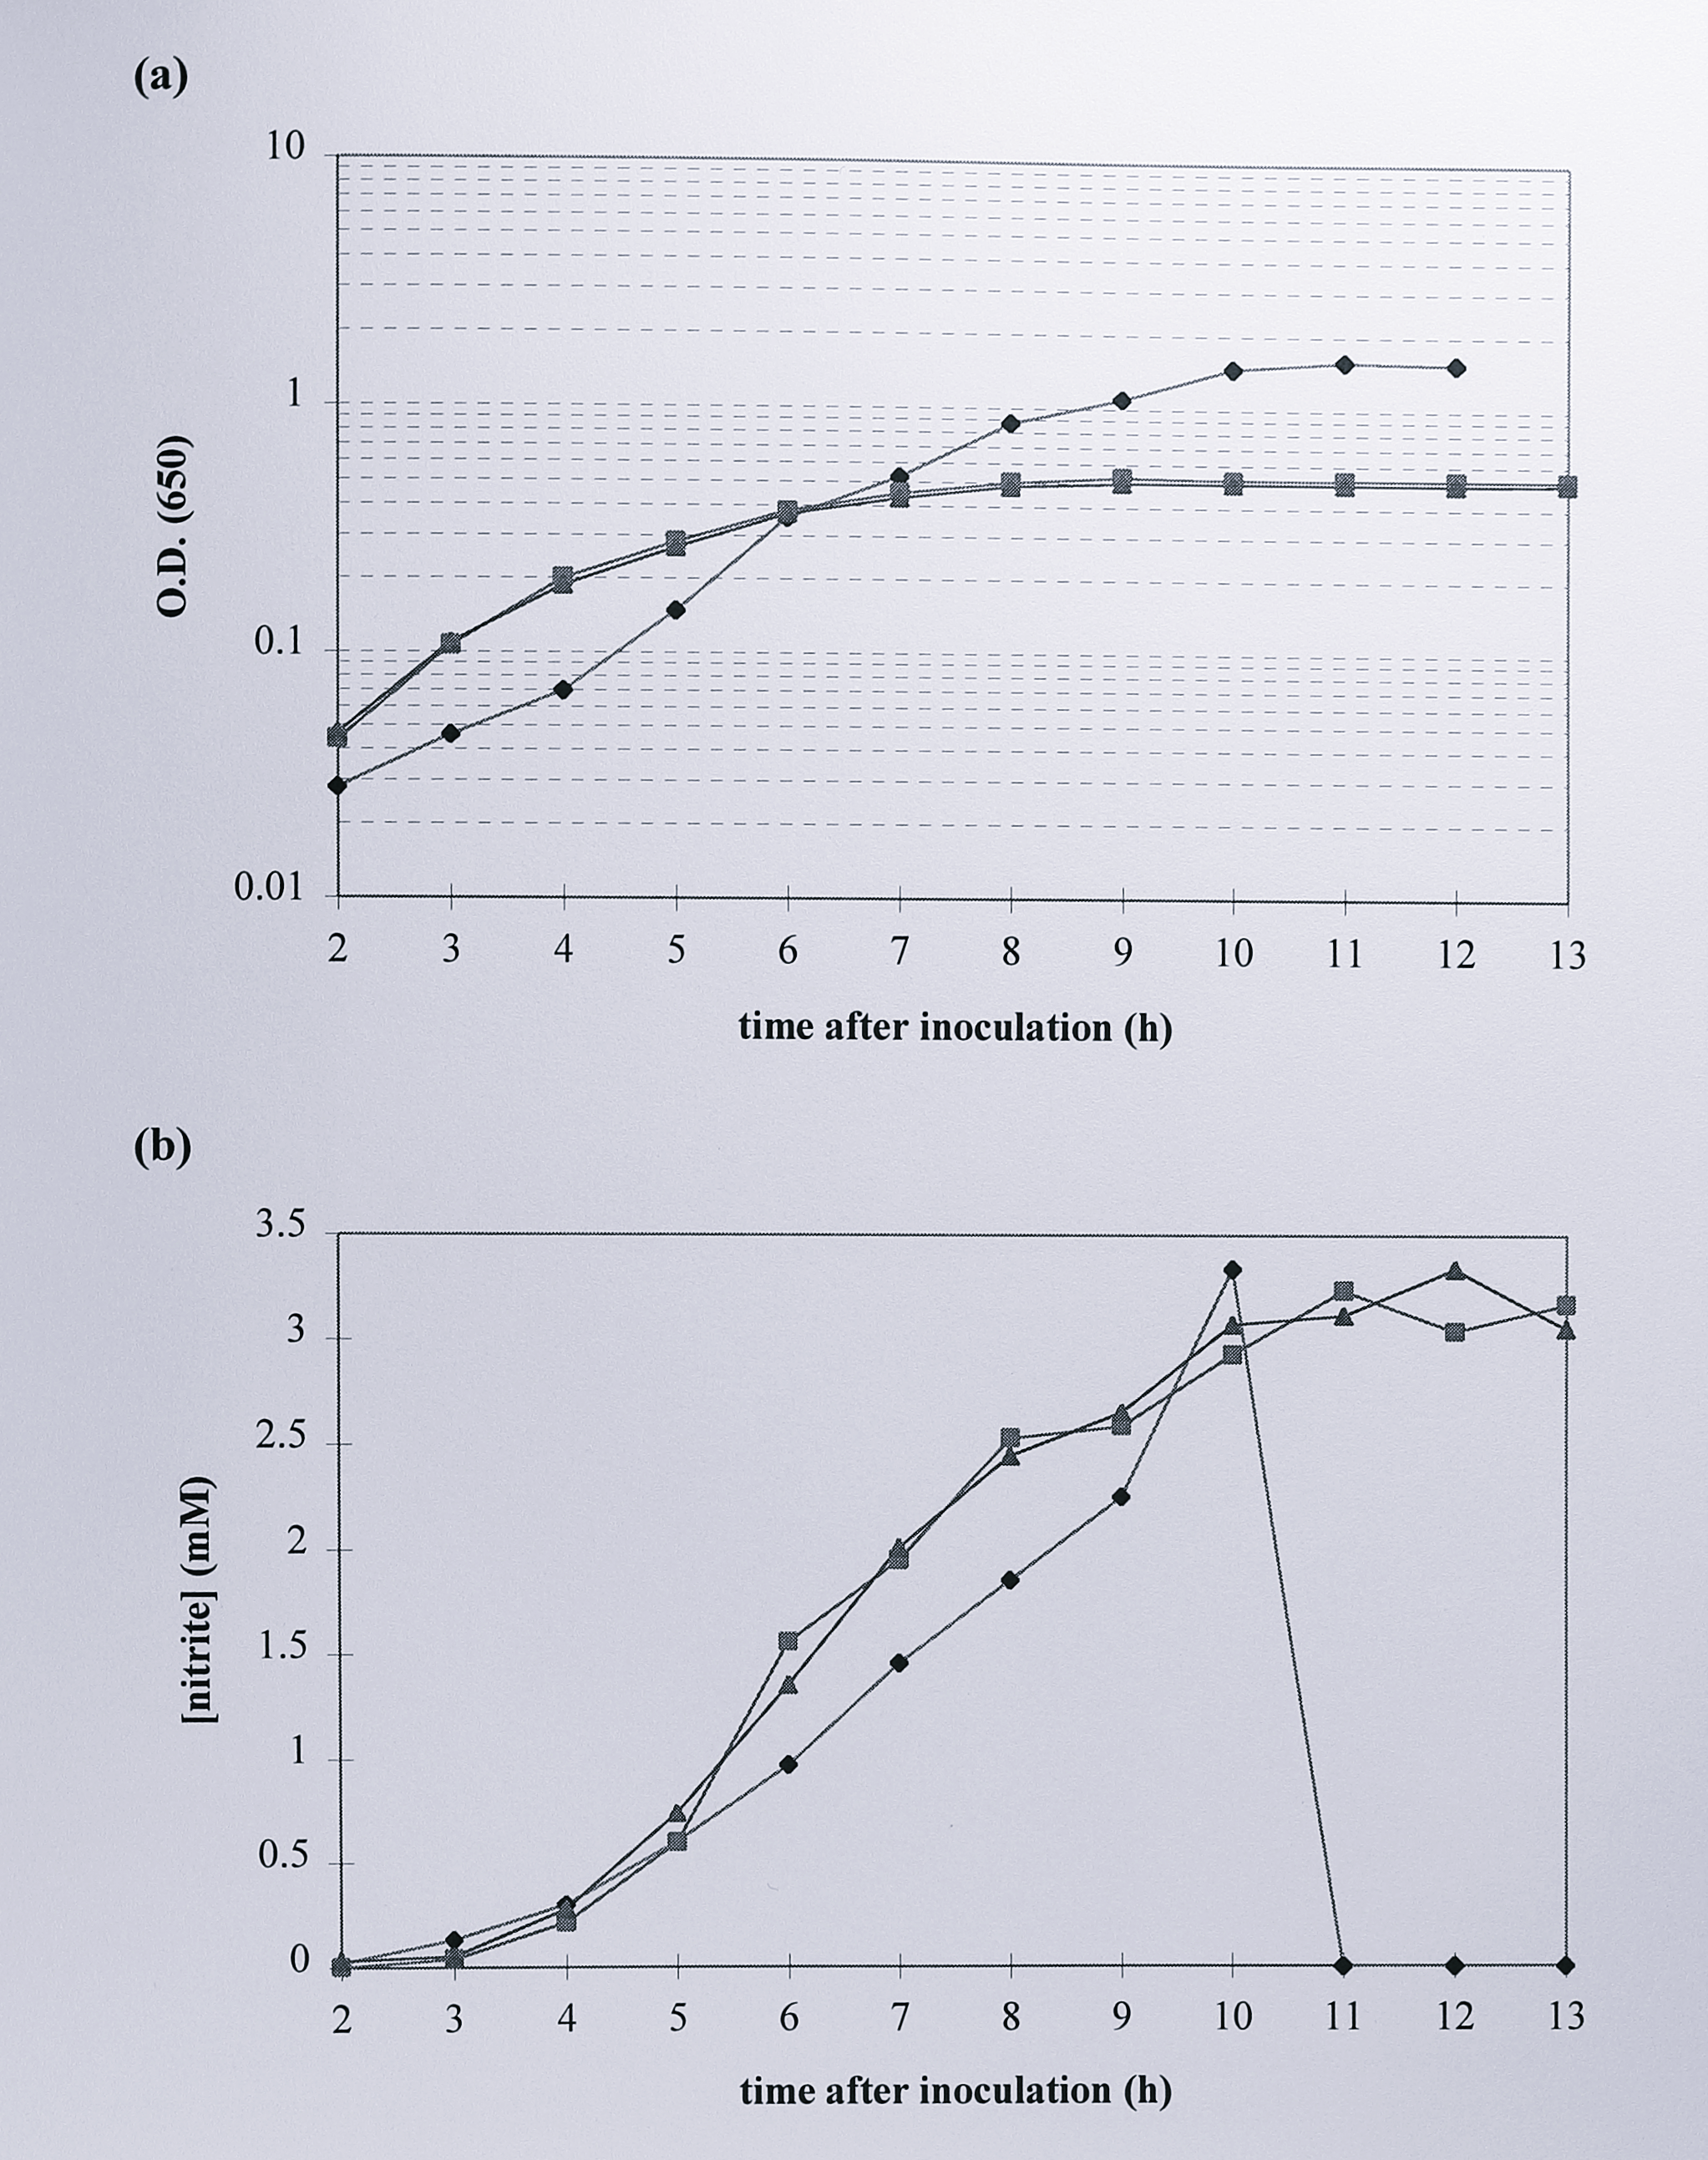 Comparison of (a) the growth curve and (b) nitrite accumulation of _Ps. aeruginosa_ with that of _Ps. aeruginosa_ [pMMBSE]. Growth is shown as absorbance at 650 nm (logarithmic scale) against time after inoculation. For nitrite determination, 1 ml samples were harvested at each time point and the supernatant was assayed for nitrite colorimetrically (Materials and Methods). Symbols: (&#9670;) _Ps. aeruginosa_, (&#9632;) _Ps. aeruginosa_ [pMMBSE], (&#9650;) _Ps. aeruginosa_ [pMMBSE] induced using 1 mM IPTG.